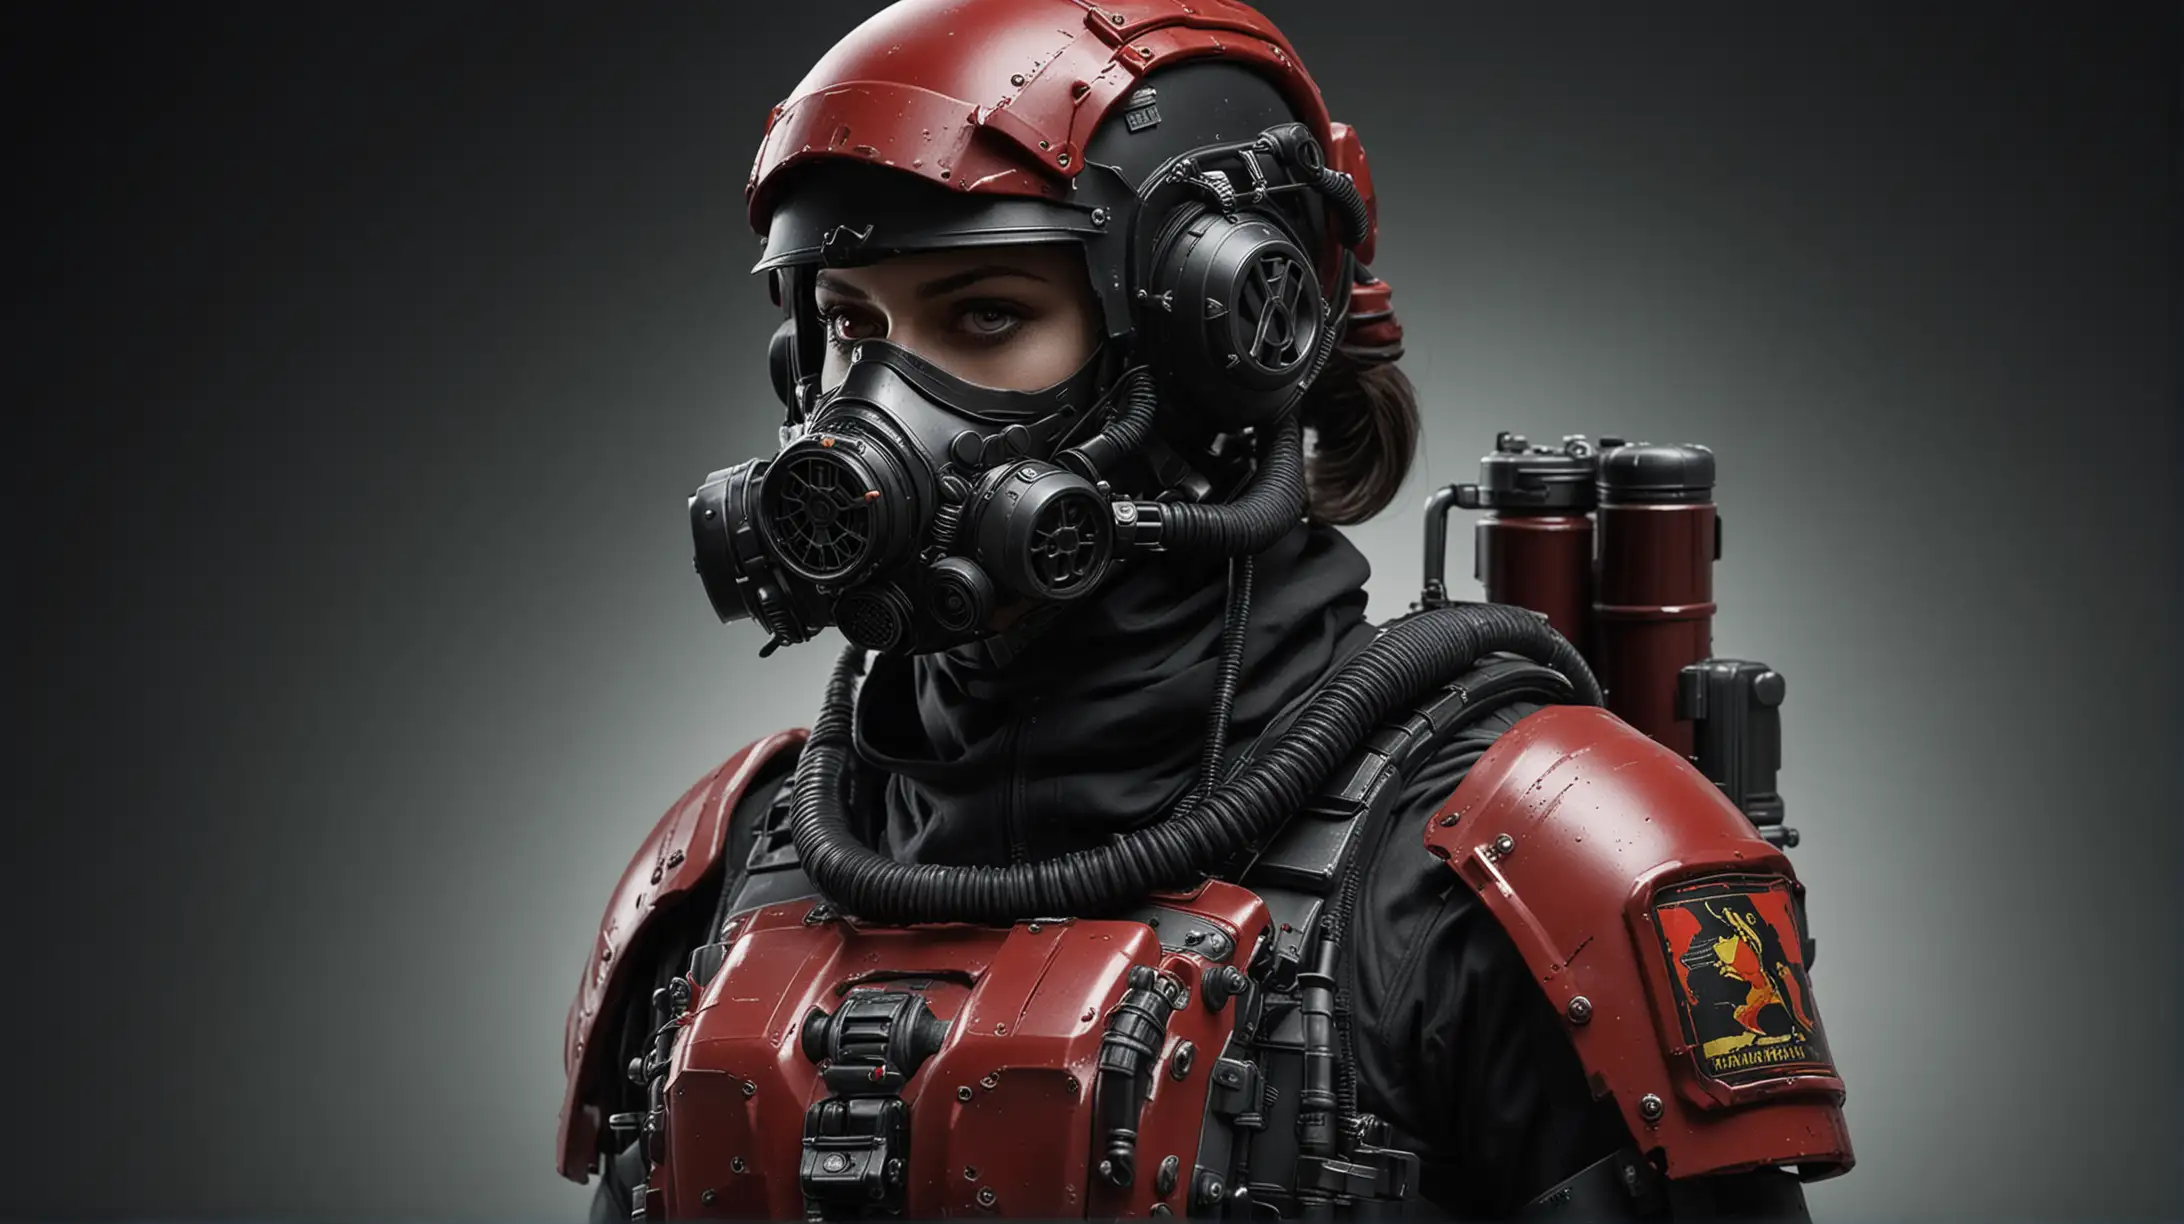 Female warhammer 40k imperial guard soldier in a closed environment suit with an smg and air tank backpack. Black, tight uniform. Full-head helmet and gas mask. Dark red glass visor covers the eyes.
Woman with big boobs. Center shot